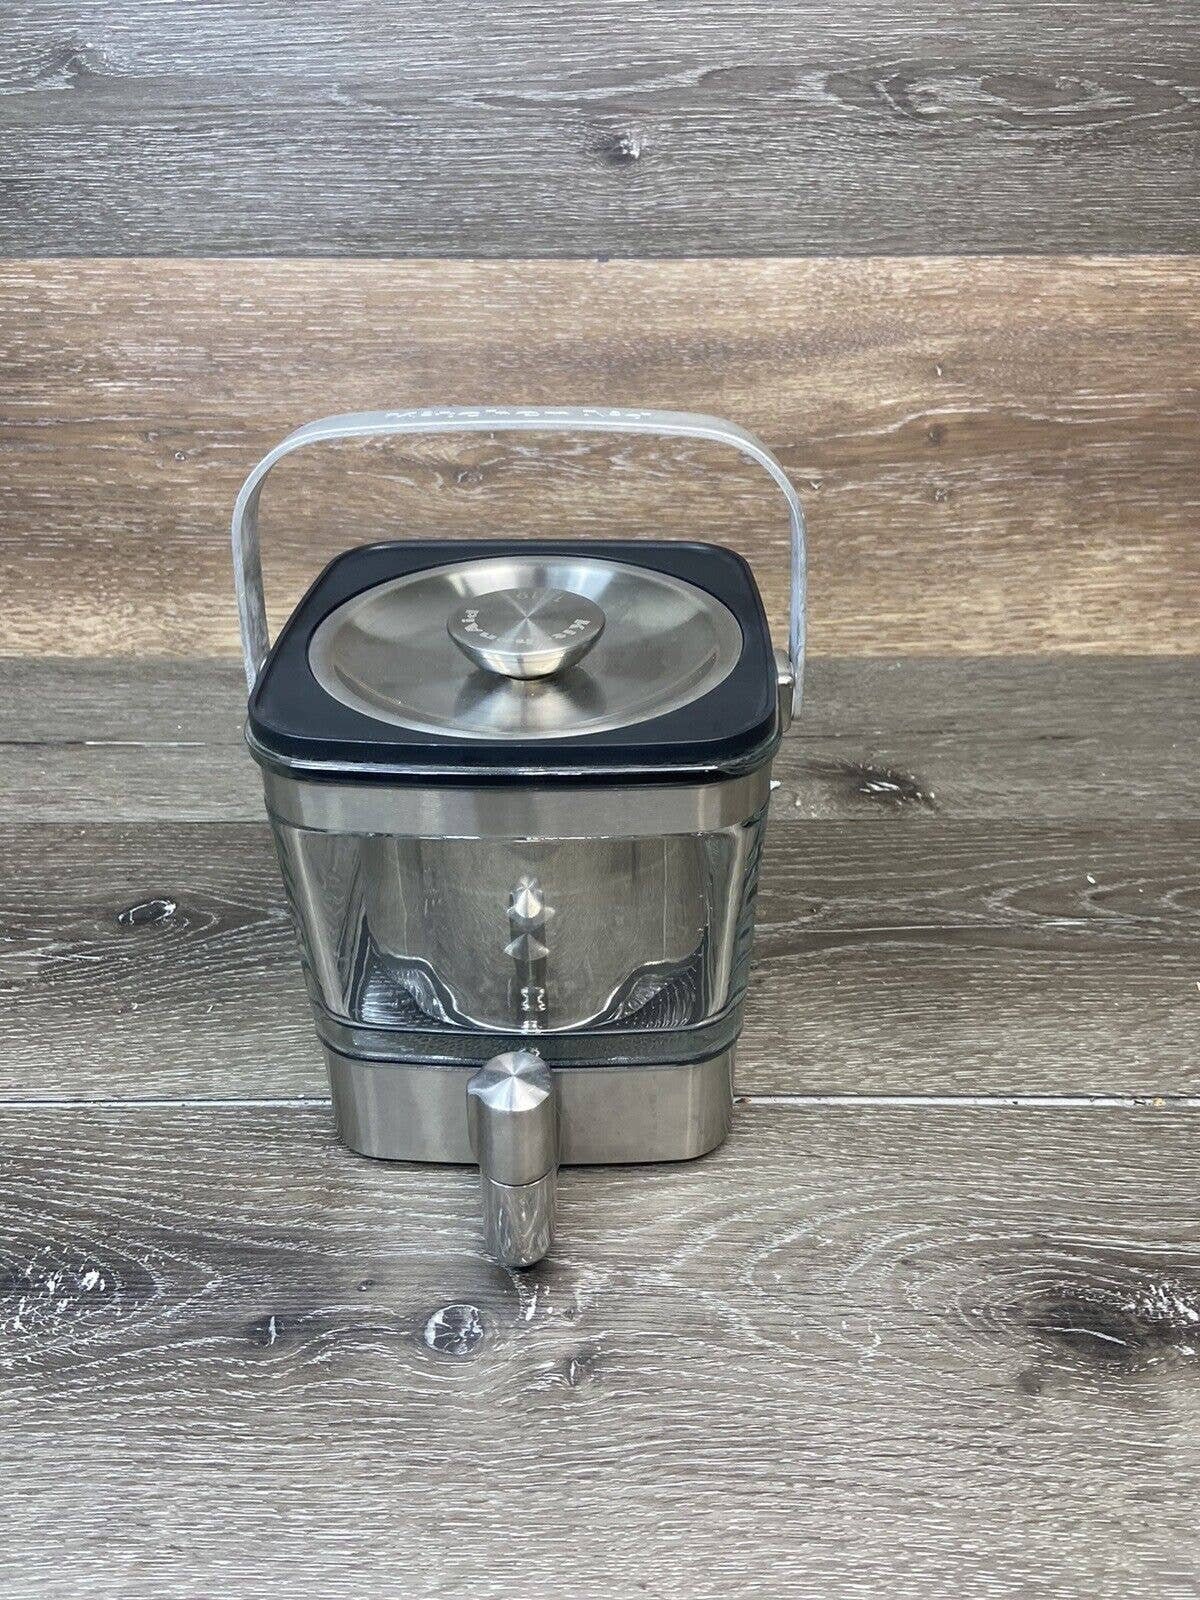 KitchenAid Stainless Cold Brew Coffee Maker - KCM4212SX